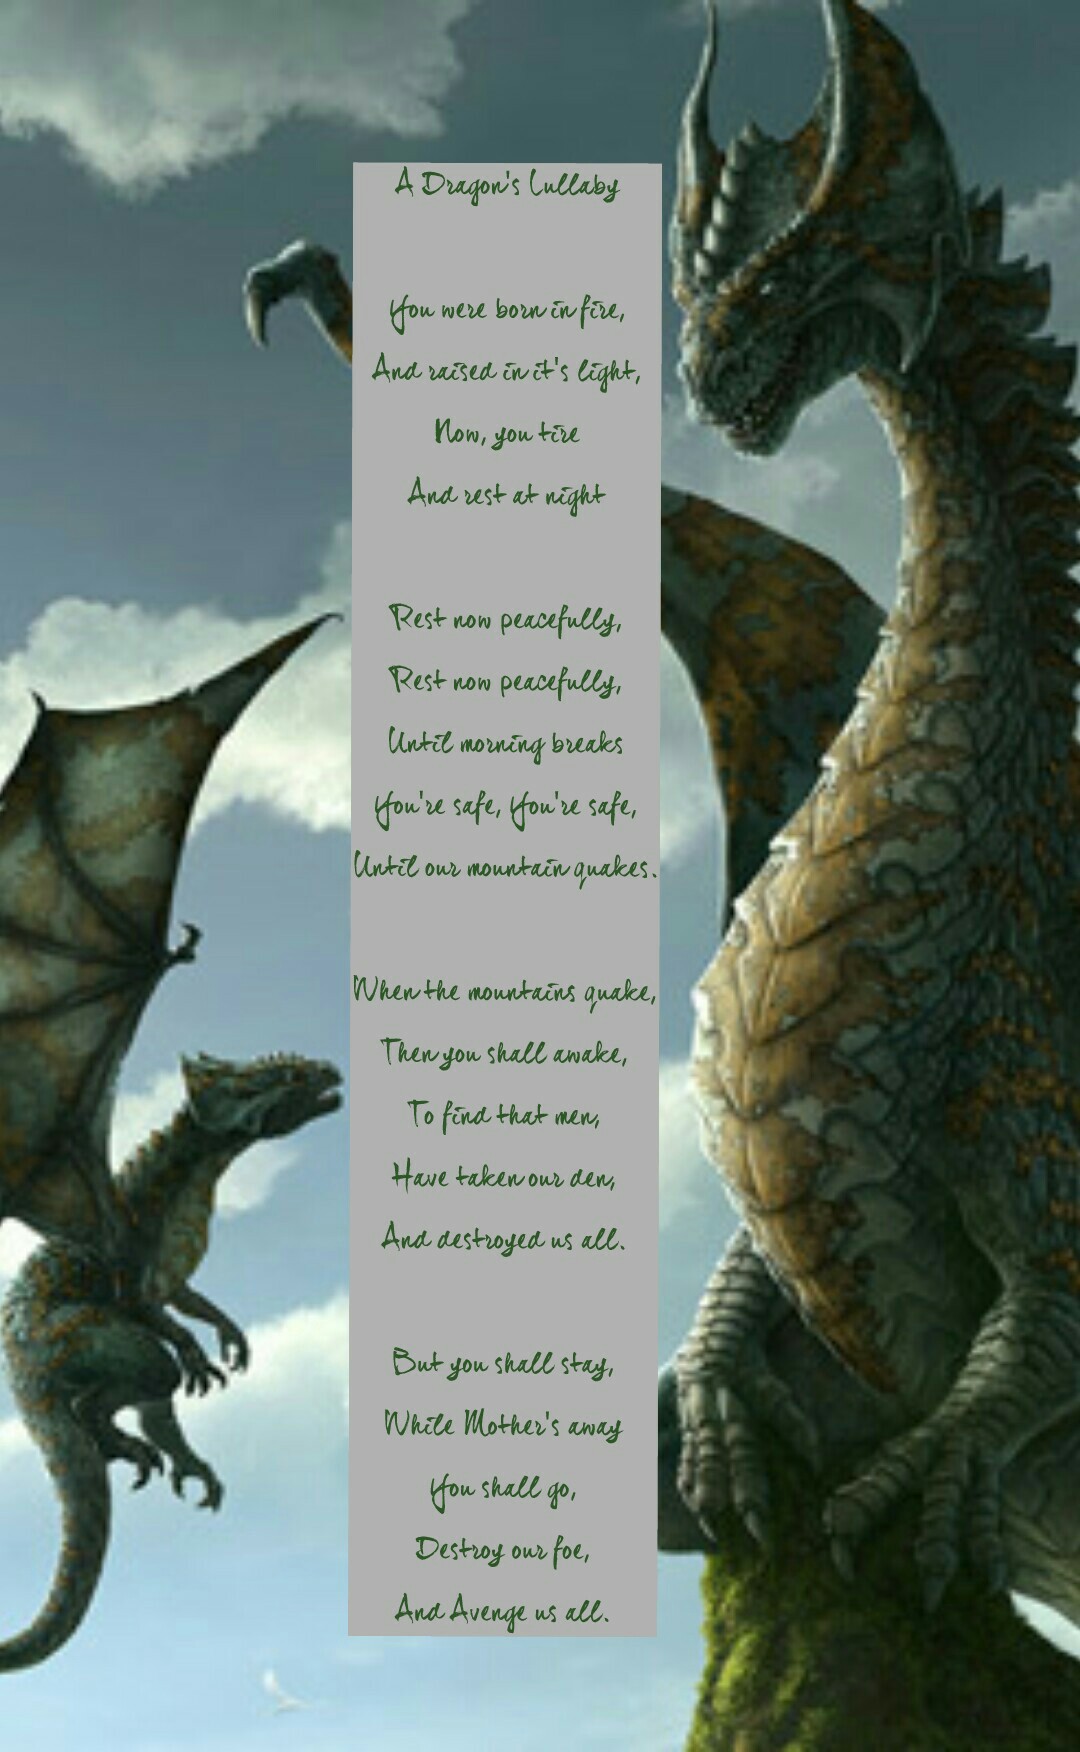 A Dragon's Lullaby
written by me!
